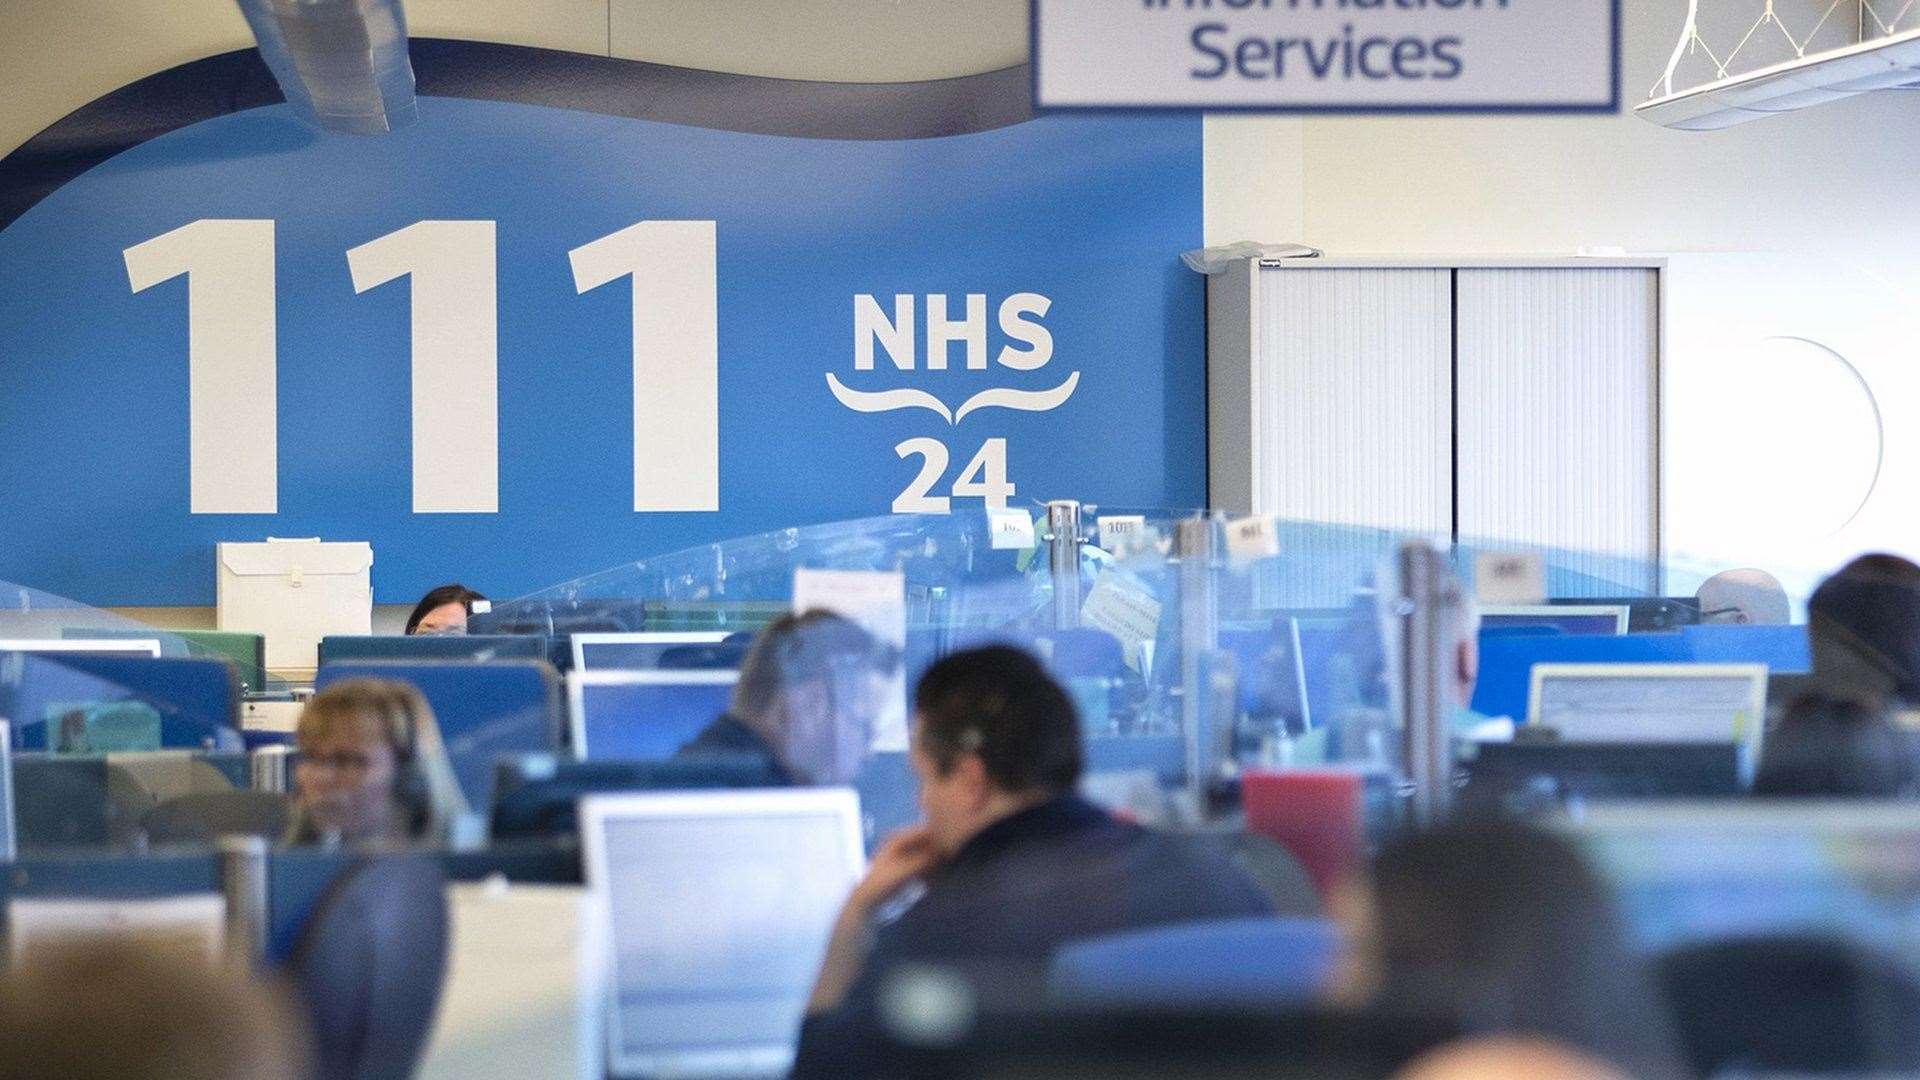 NHS 24 staff have been praised for their work over the festive period.